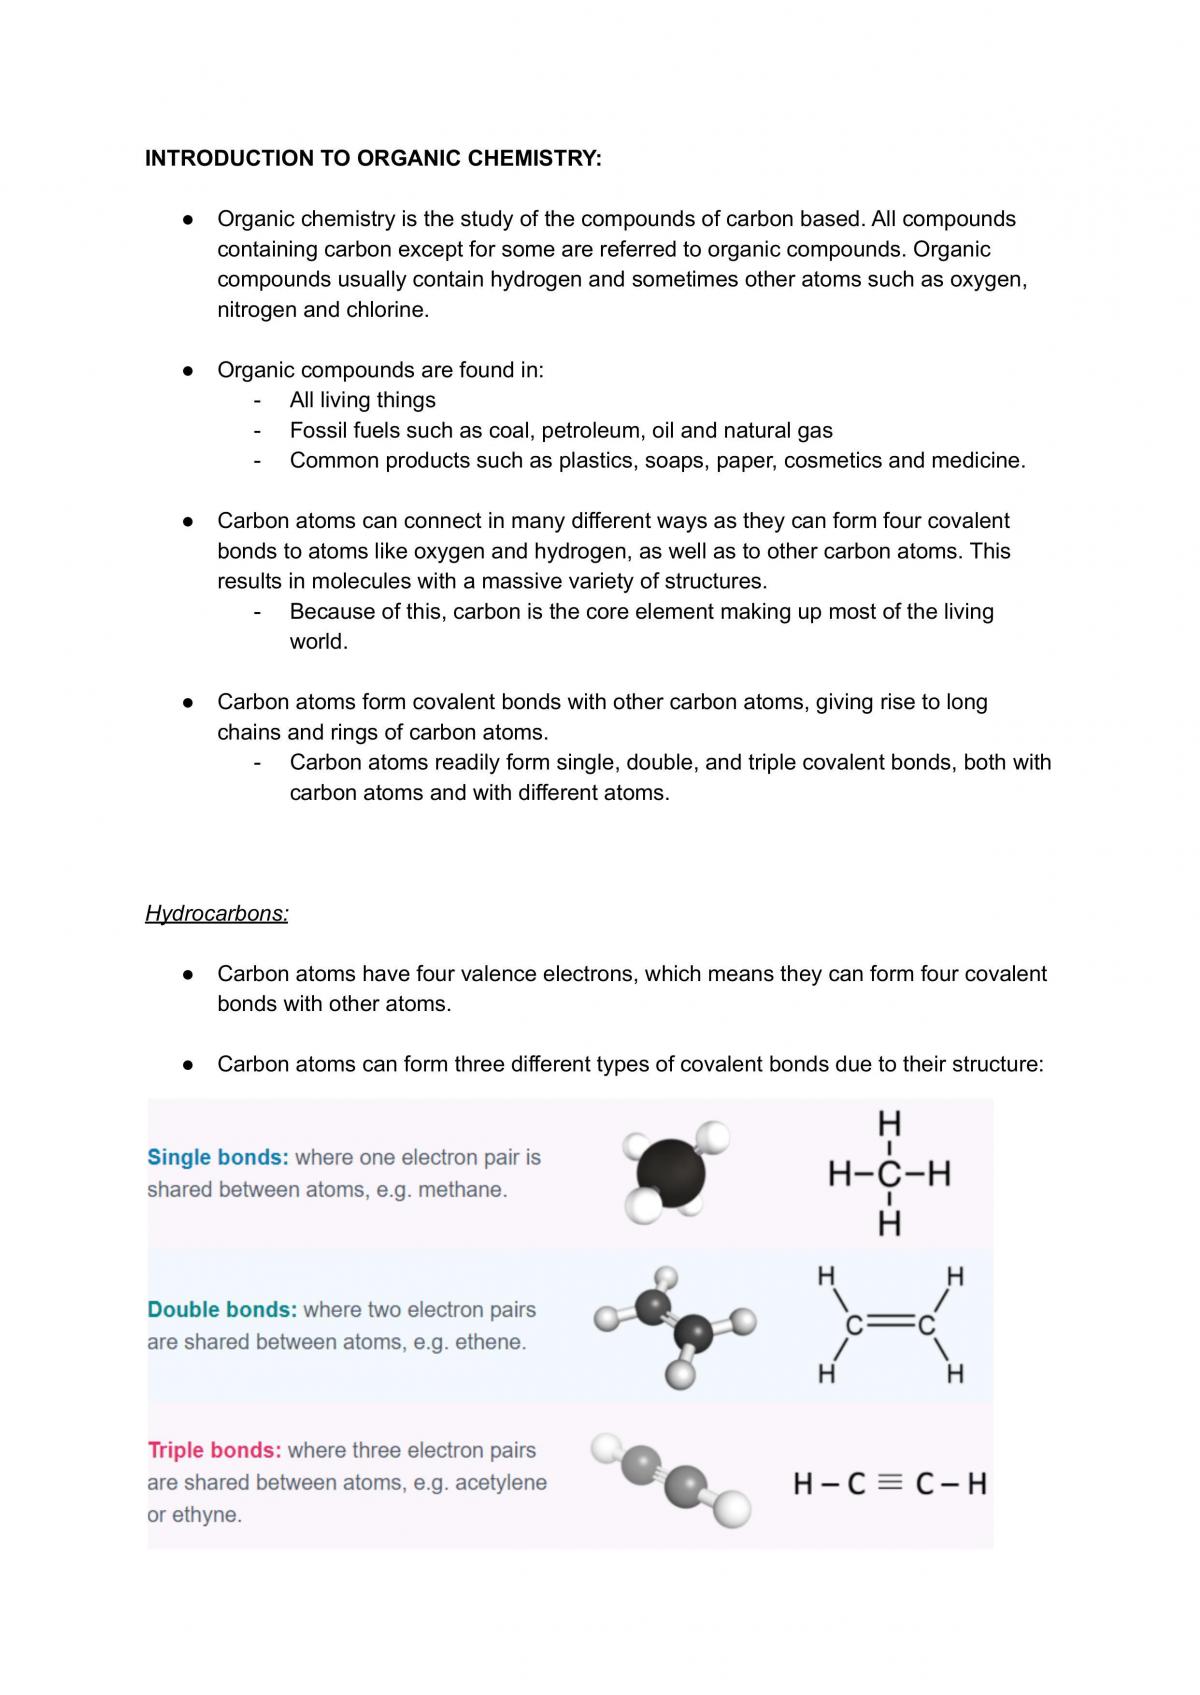 Tie-breaker rules for IUPAC nomenclature of organic compounds - Chemistry  Stack Exchange